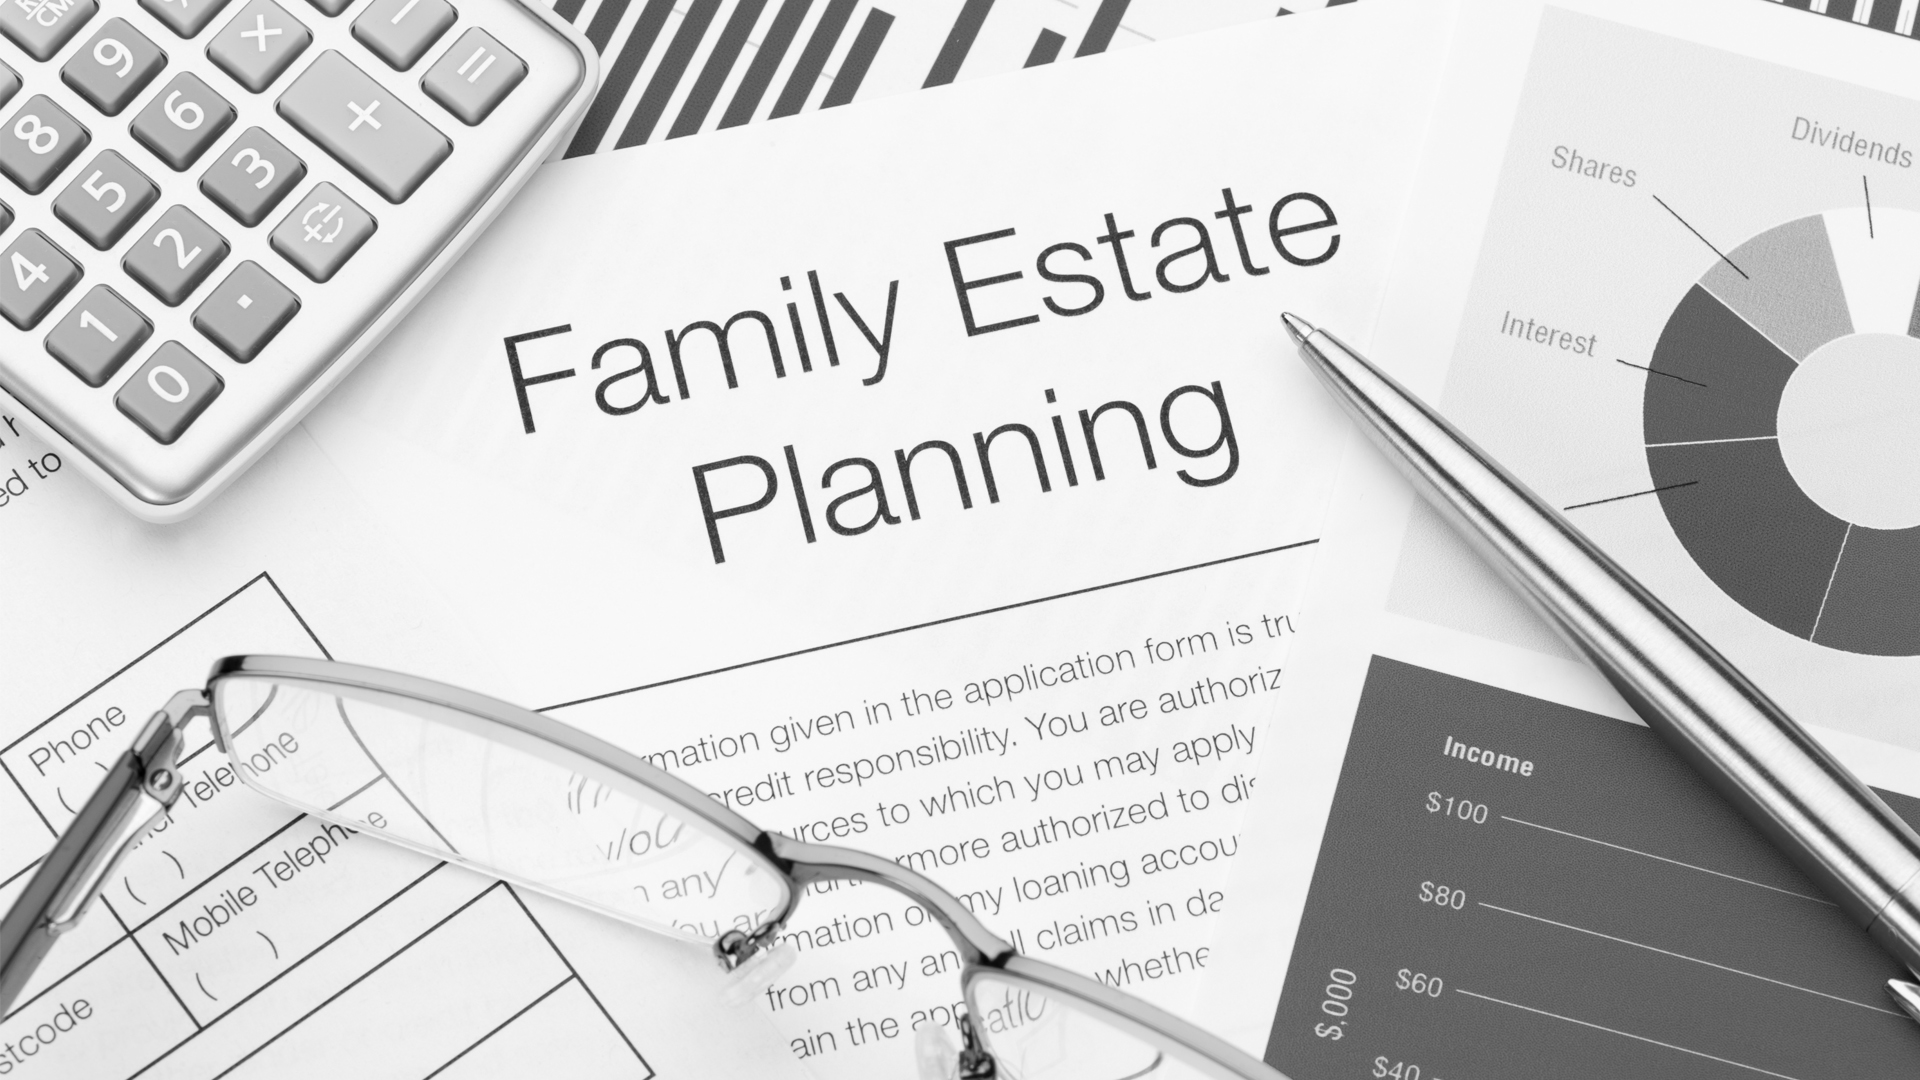 Wills, trusts, and estate planning isn’t just for the wealthy.